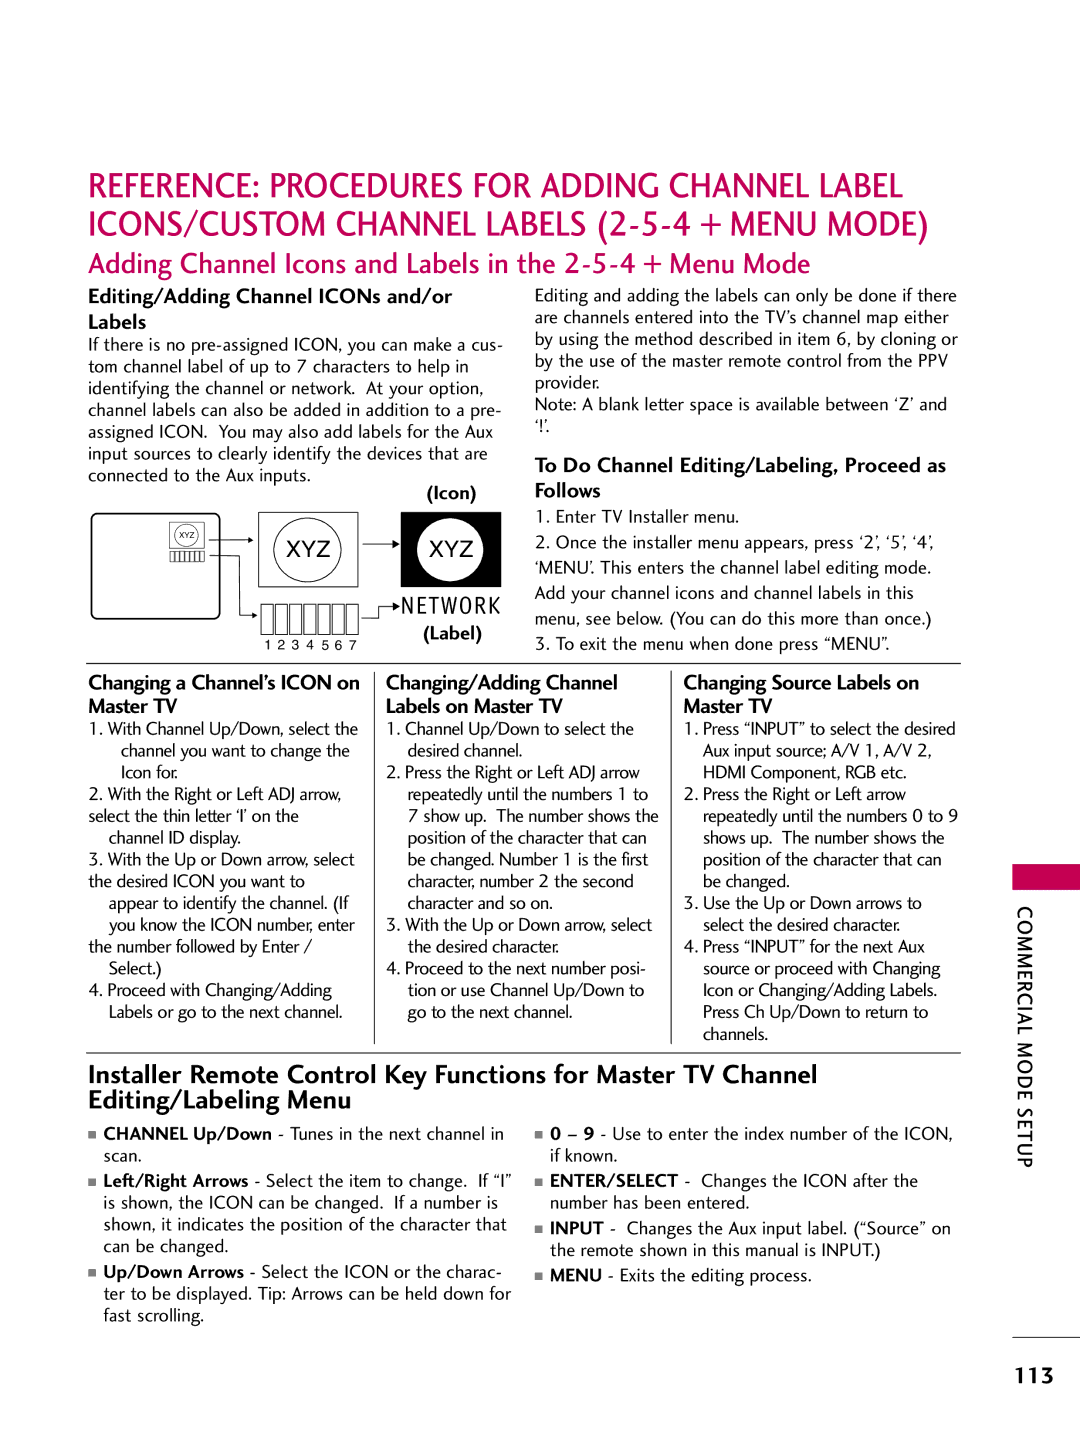 LG Electronics 42LD655H Adding Channel Icons and Labels in the 2-5-4 + Menu Mode, Changing a Channel’s Icon on Master TV 